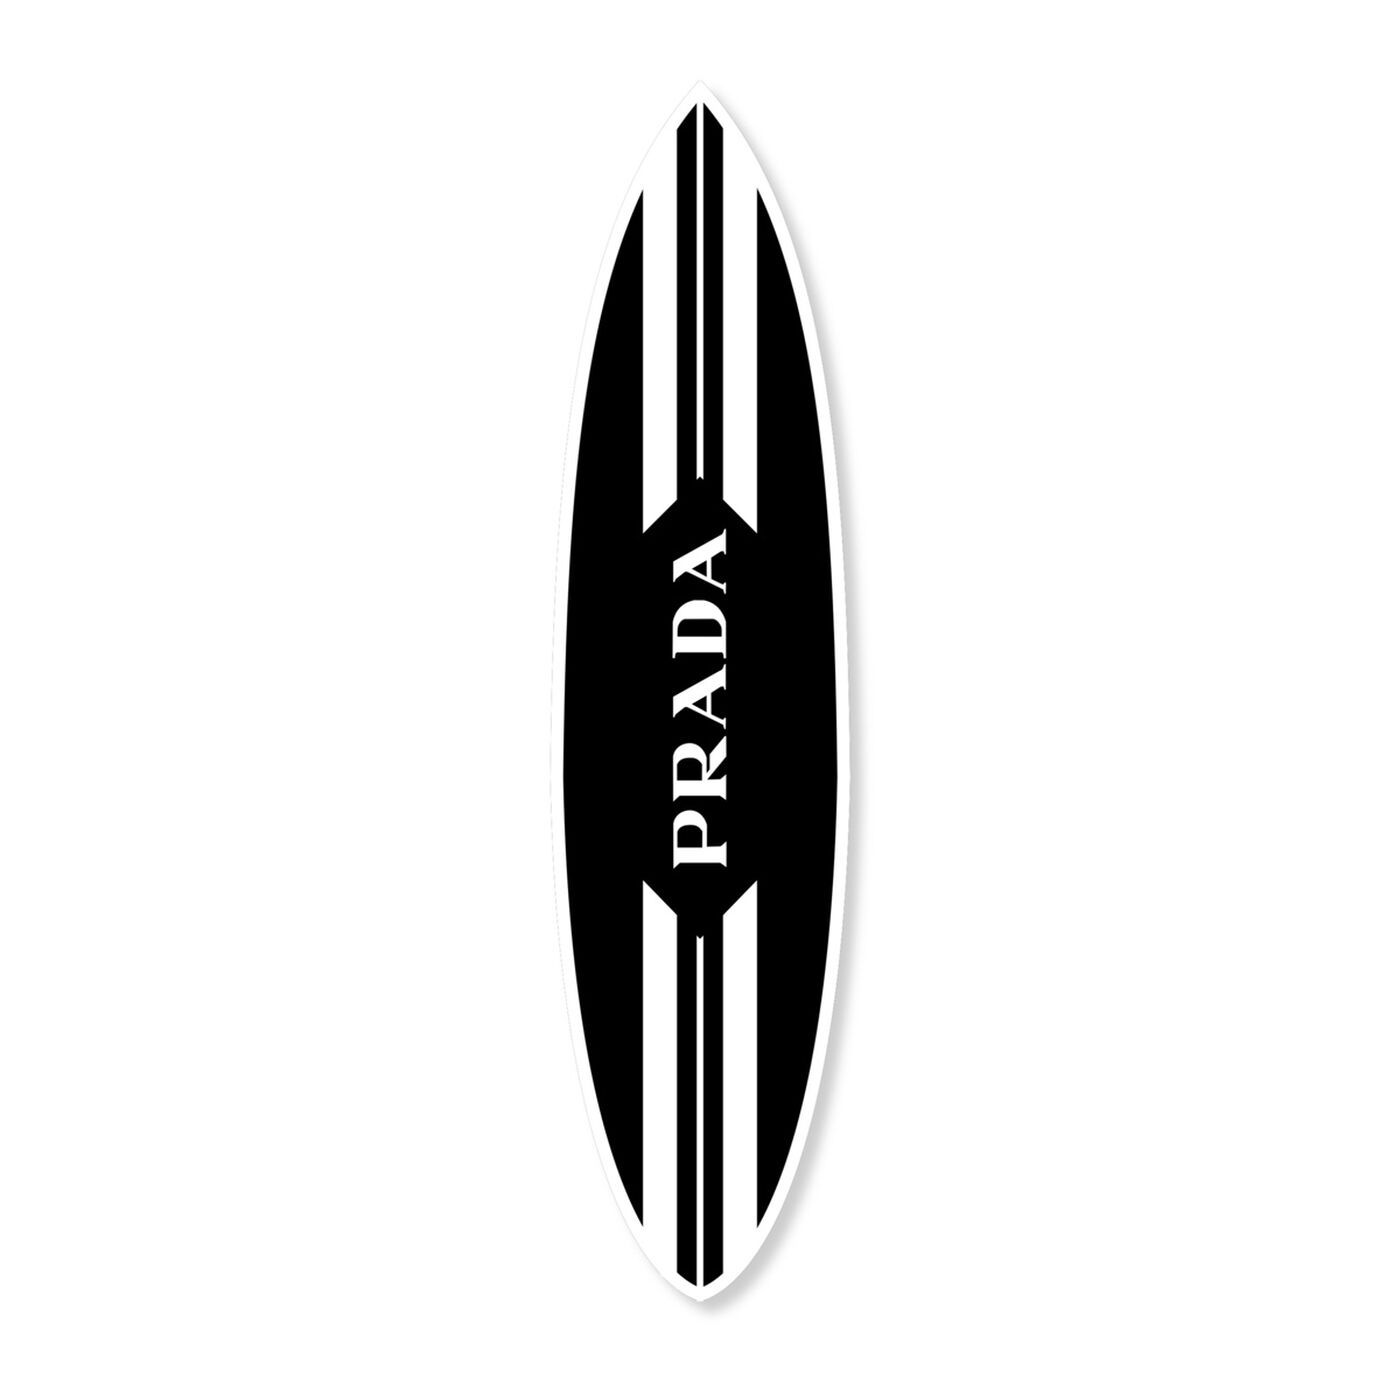 Milano Surfboard | Wall Art by The Oliver Gal | Oliver Gal